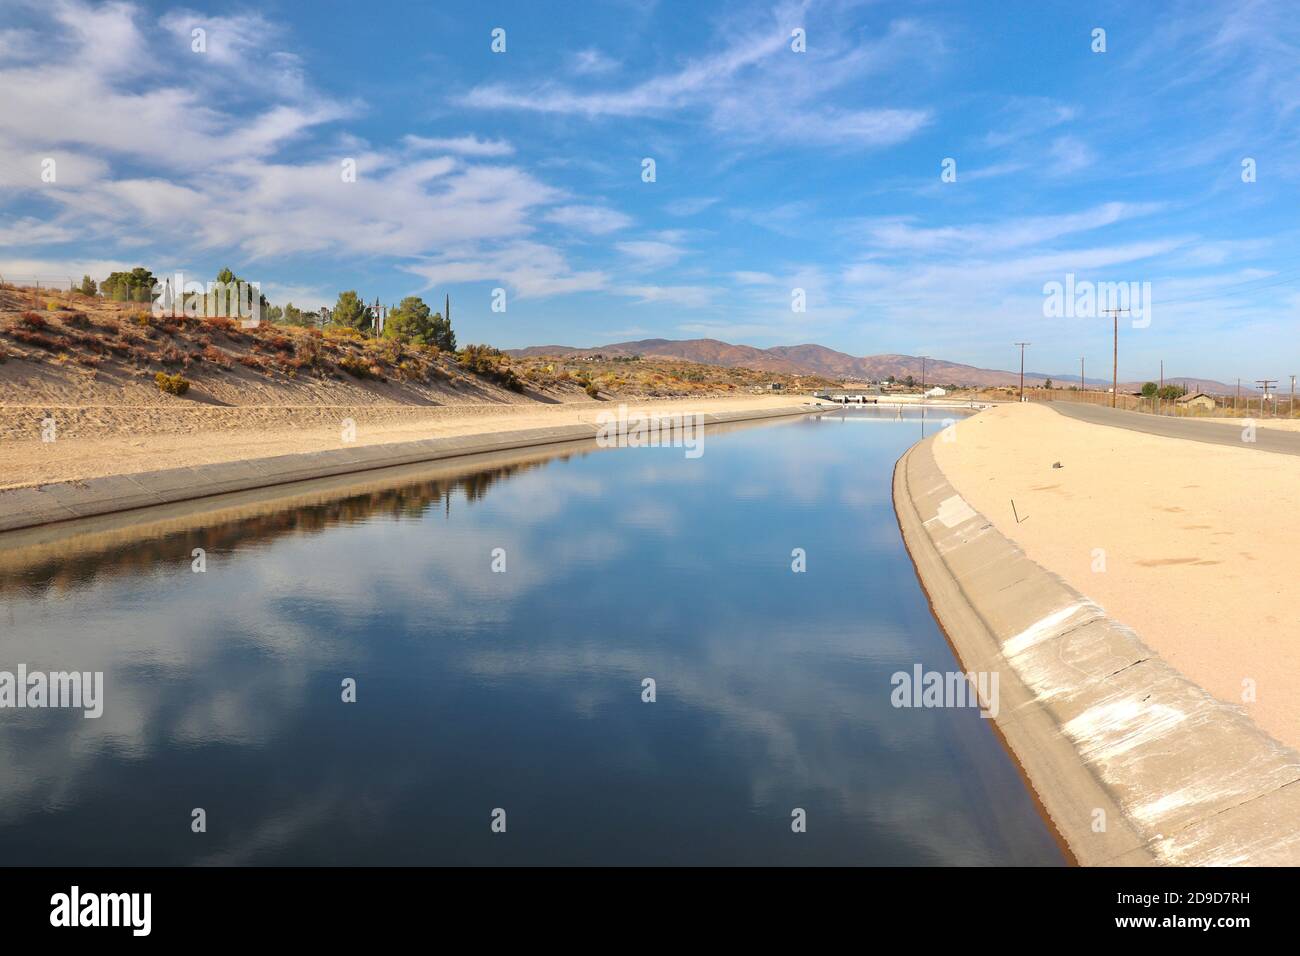 Scenic view of Lake Palmdale and the California aqueduct Stock Photo